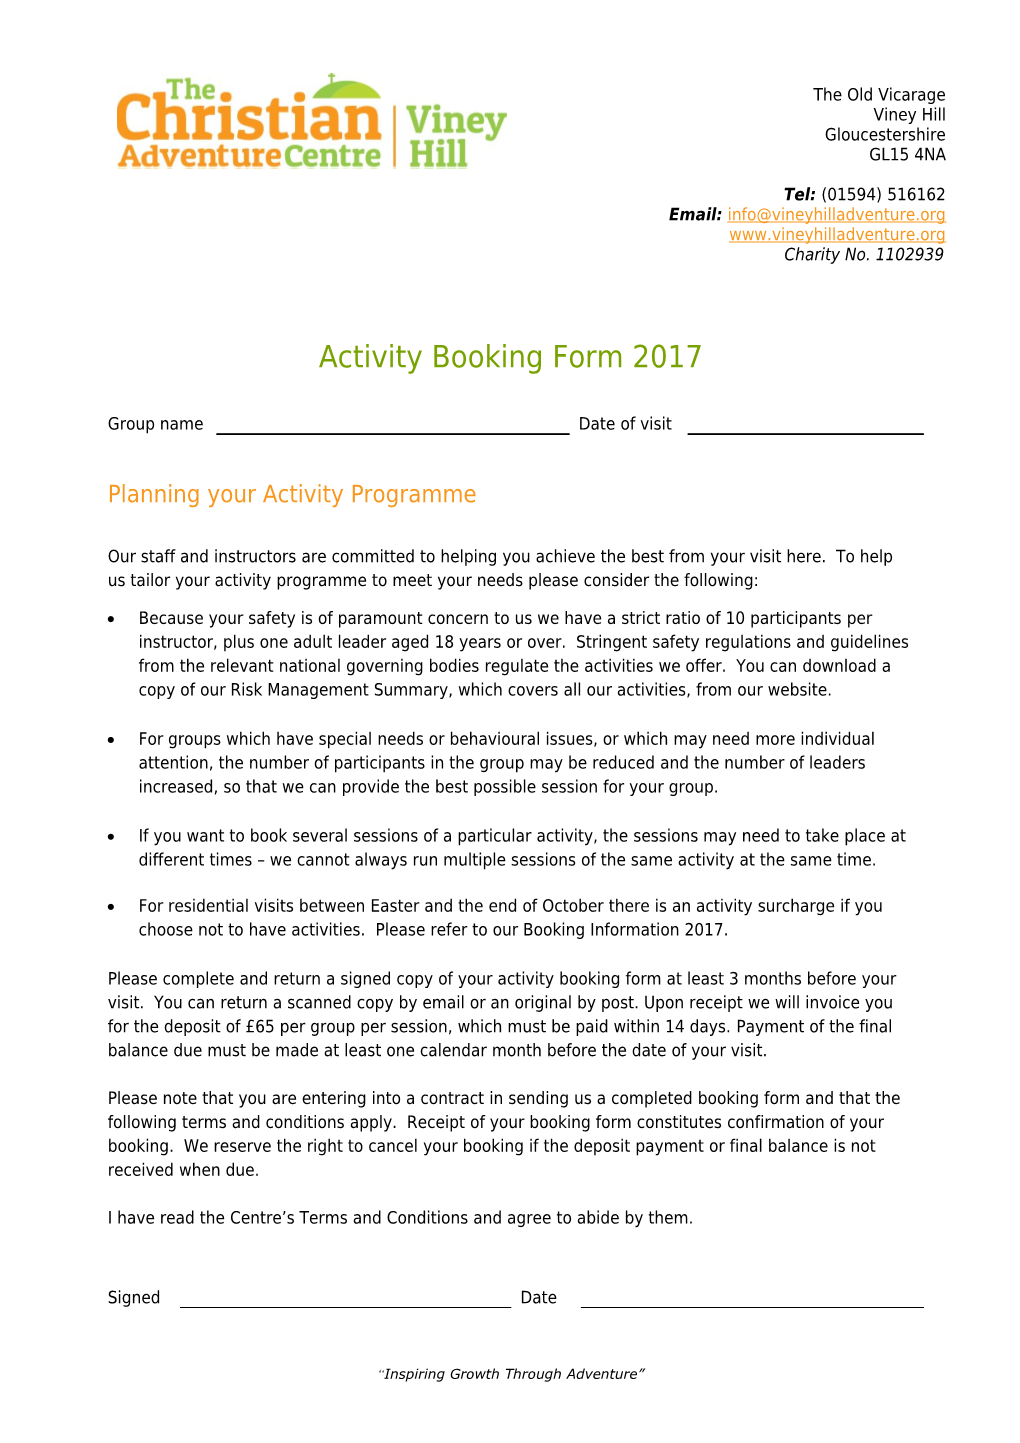 Planning Your Activity Programme